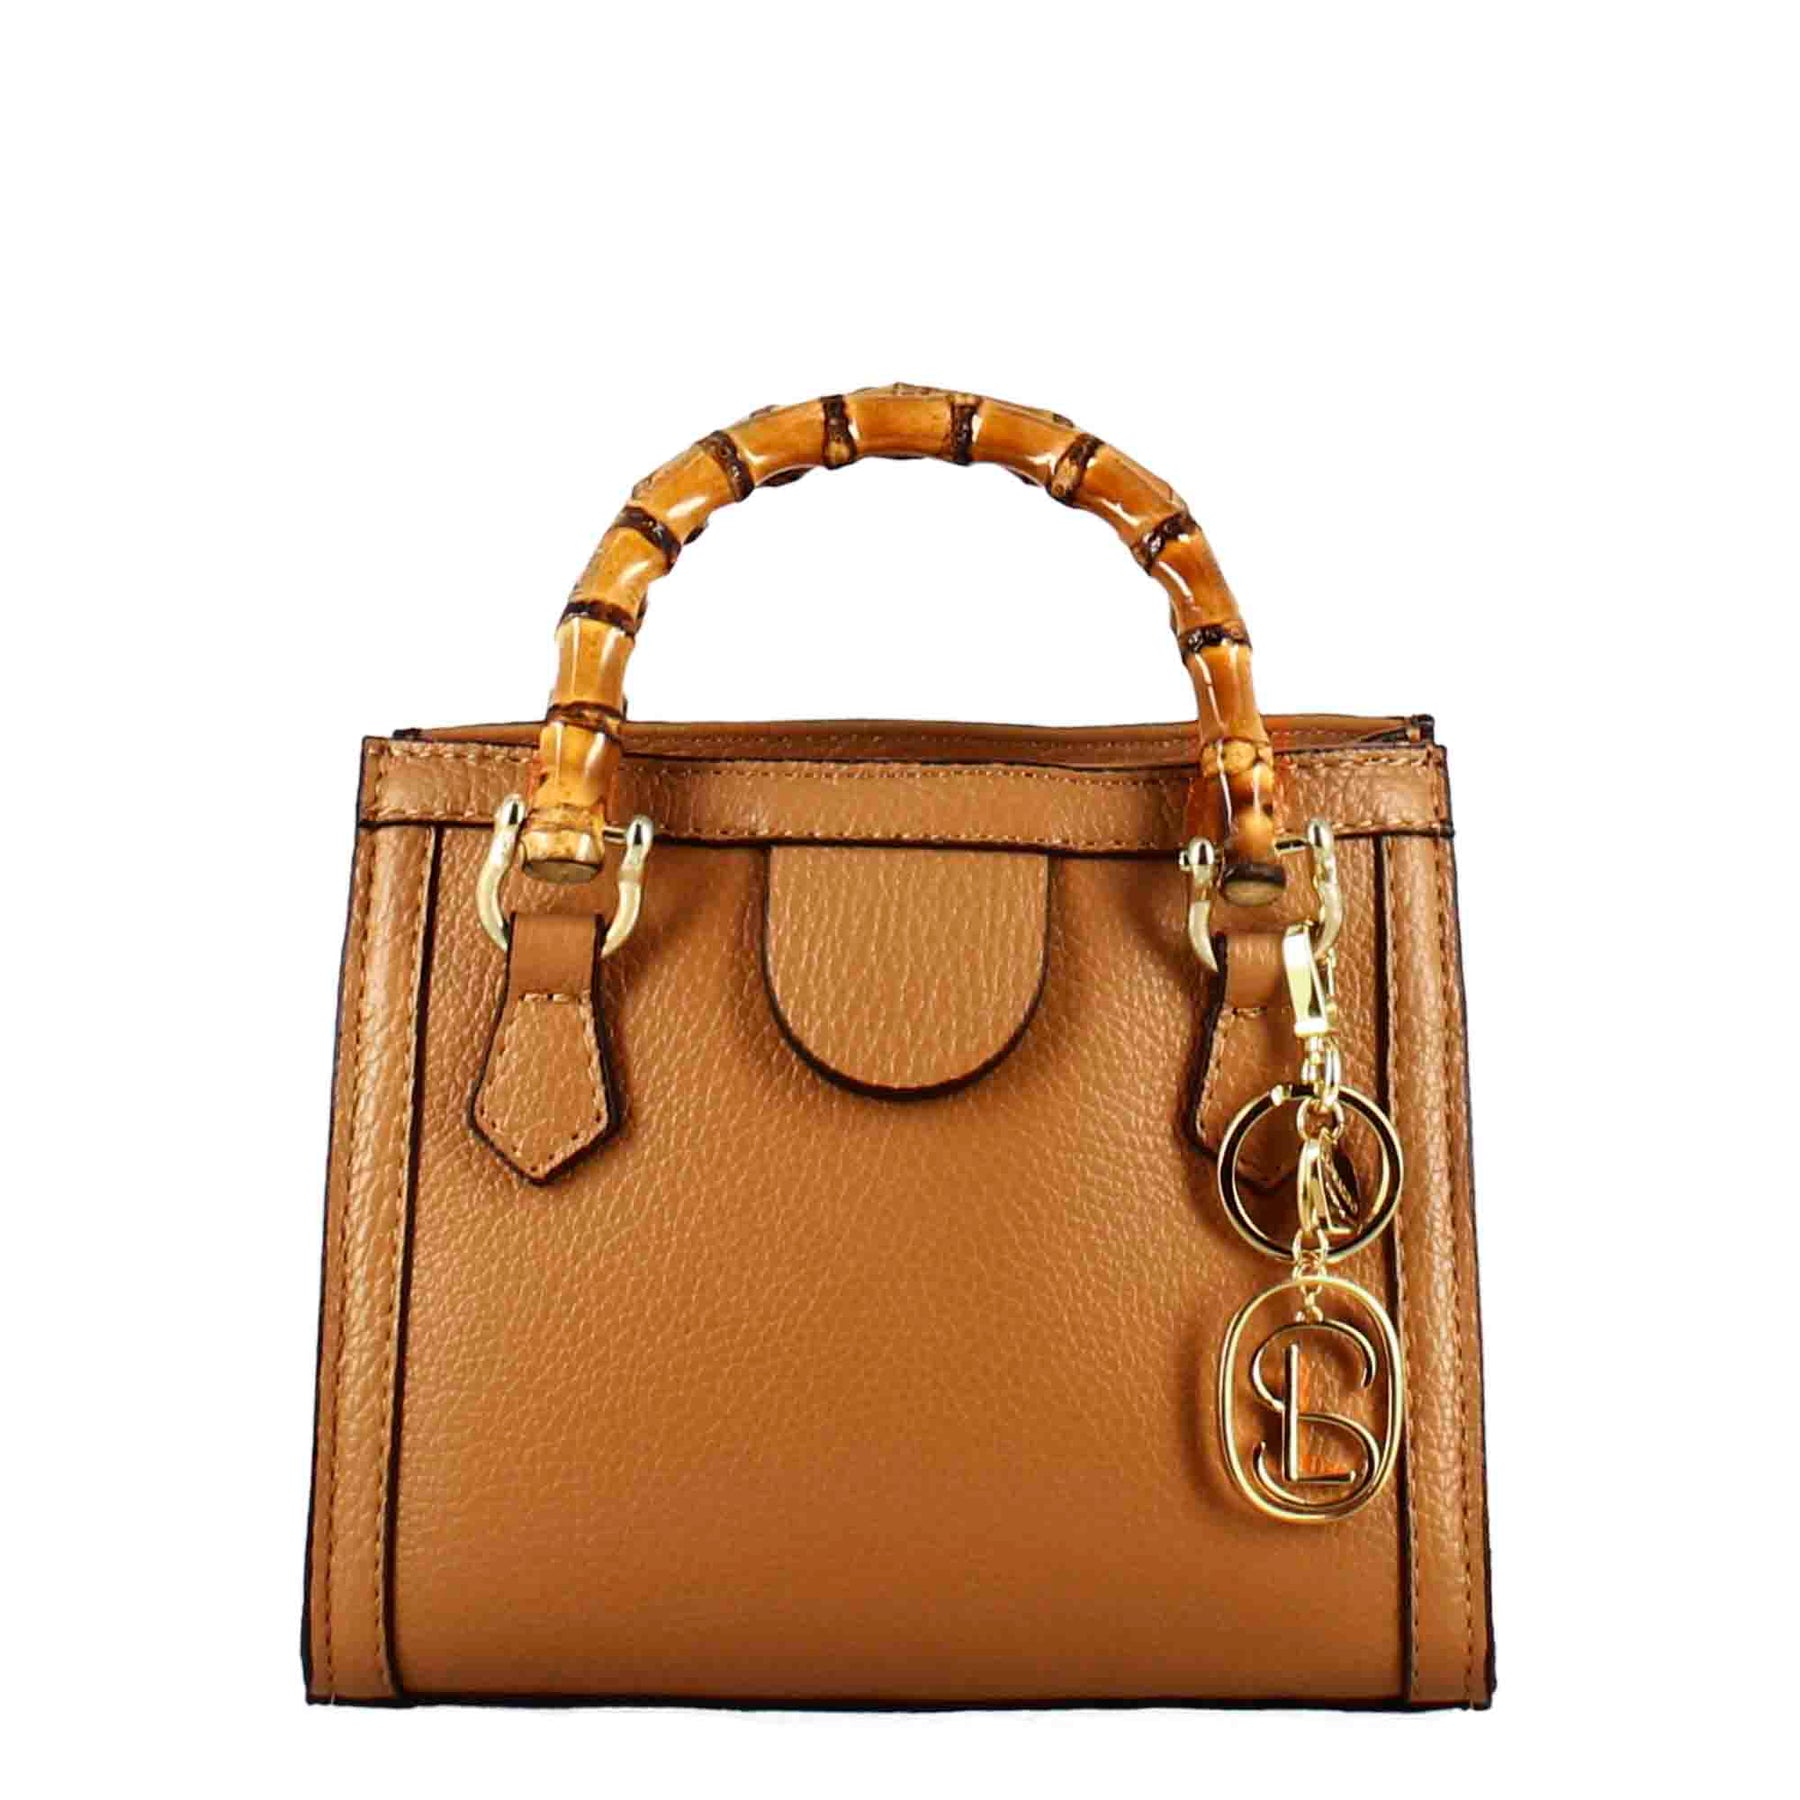 Brown leather mini Bamboo handbag for women with wooden handles and shoulder strap